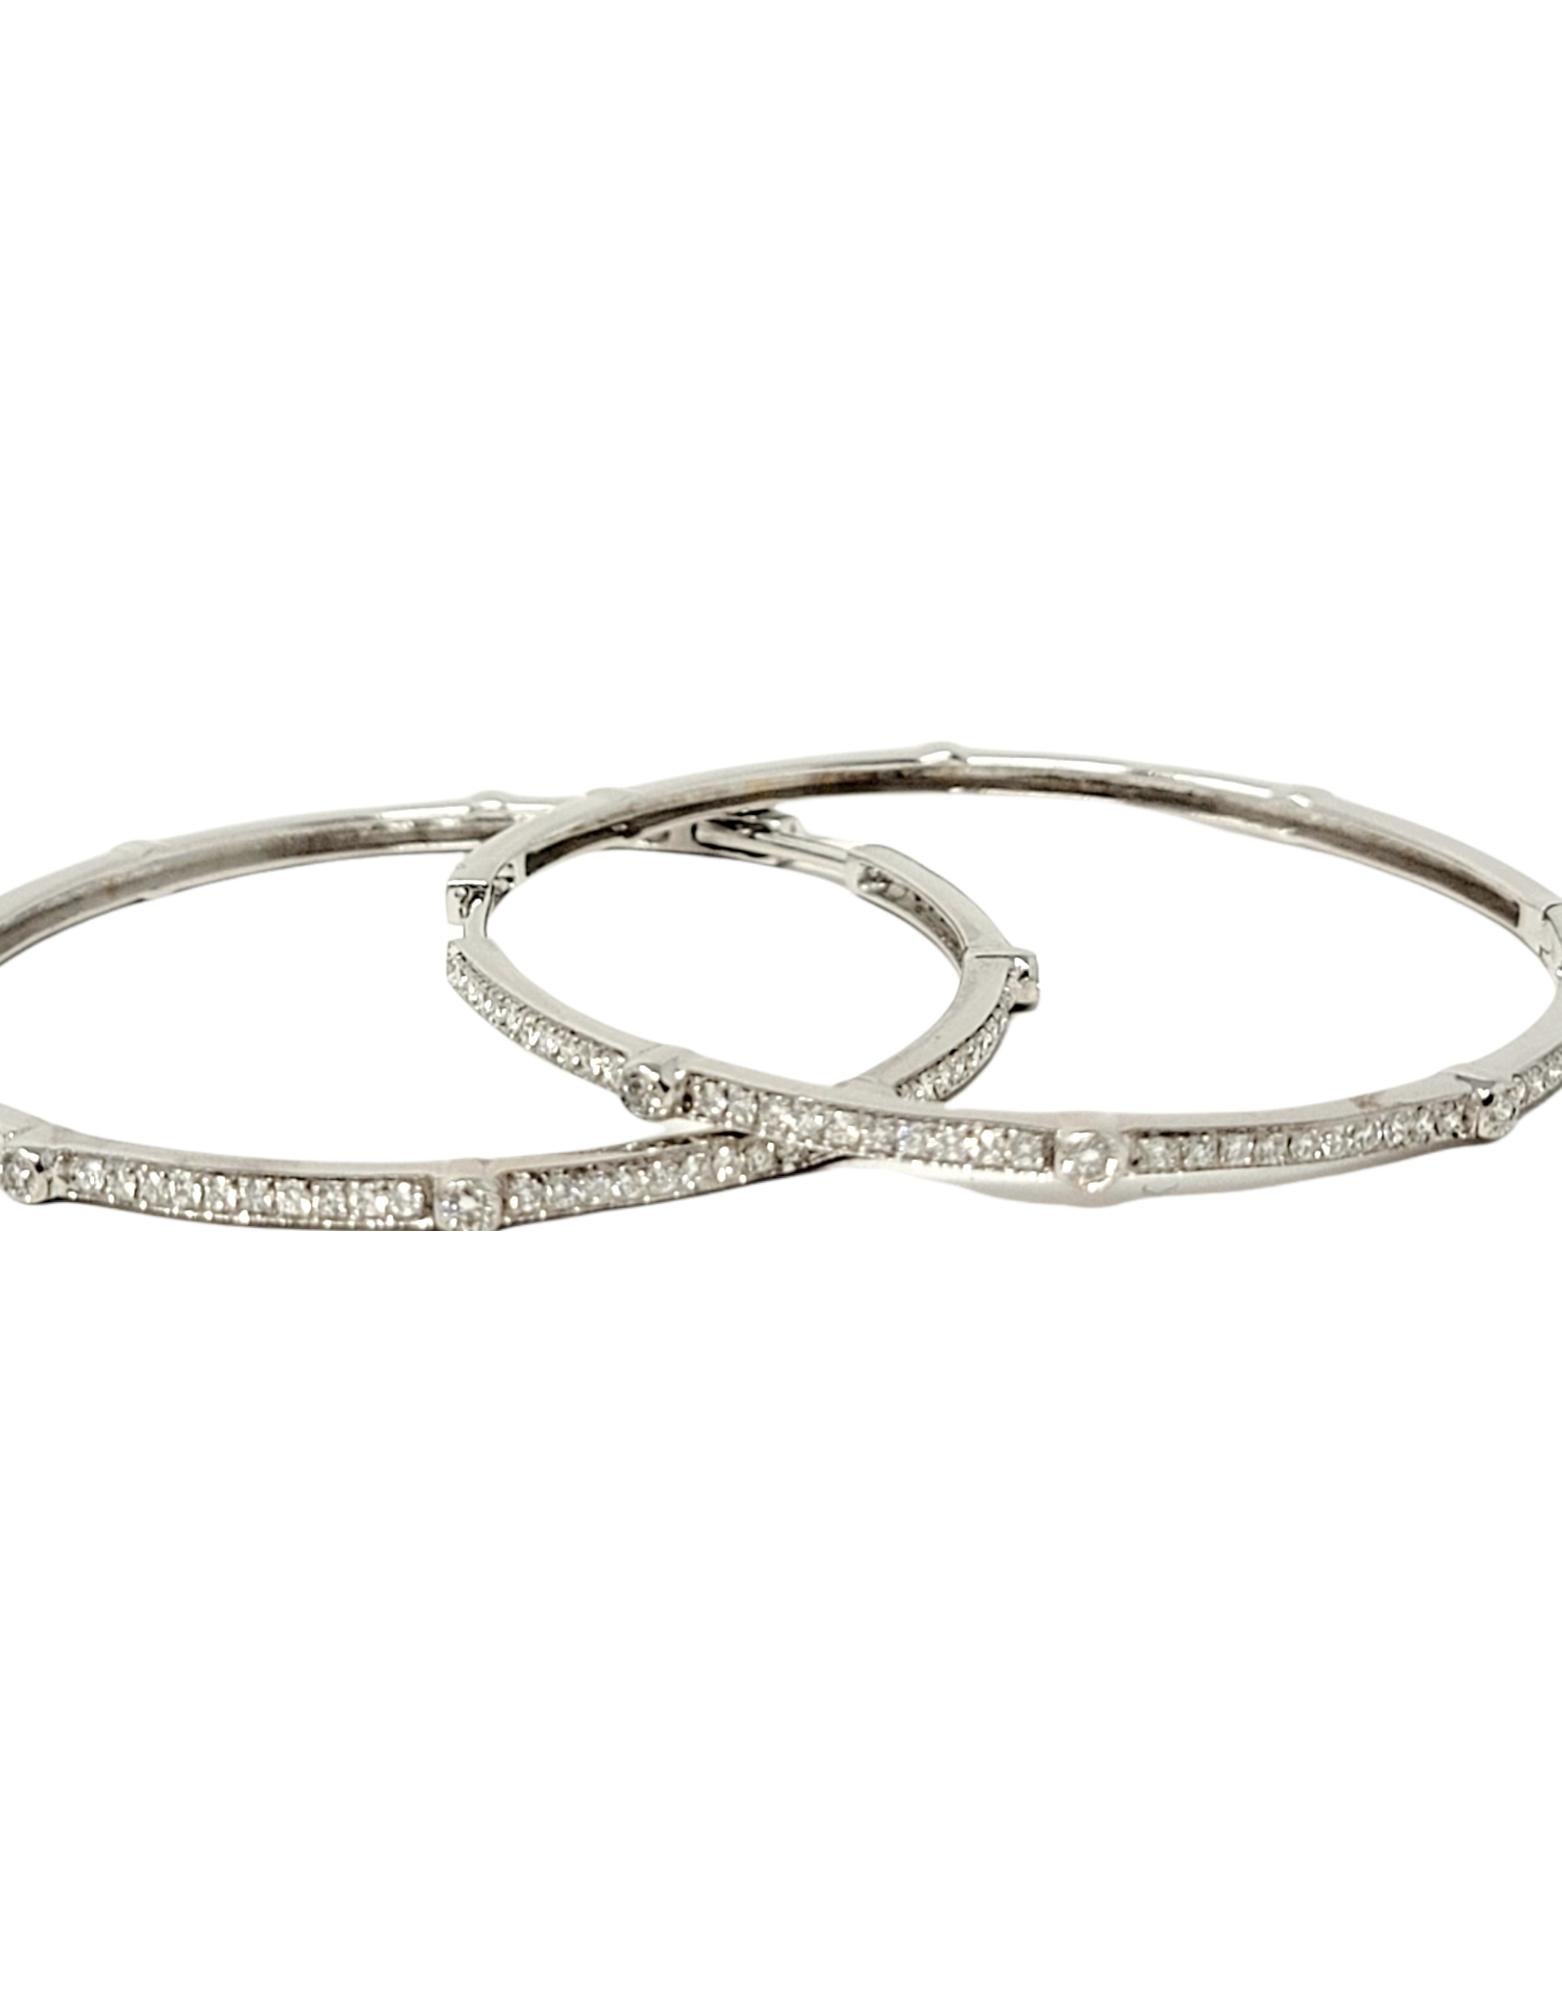 .75 Carats Total Round Diamond Station Hoop Earrings 18 Karat White Gold For Sale 2